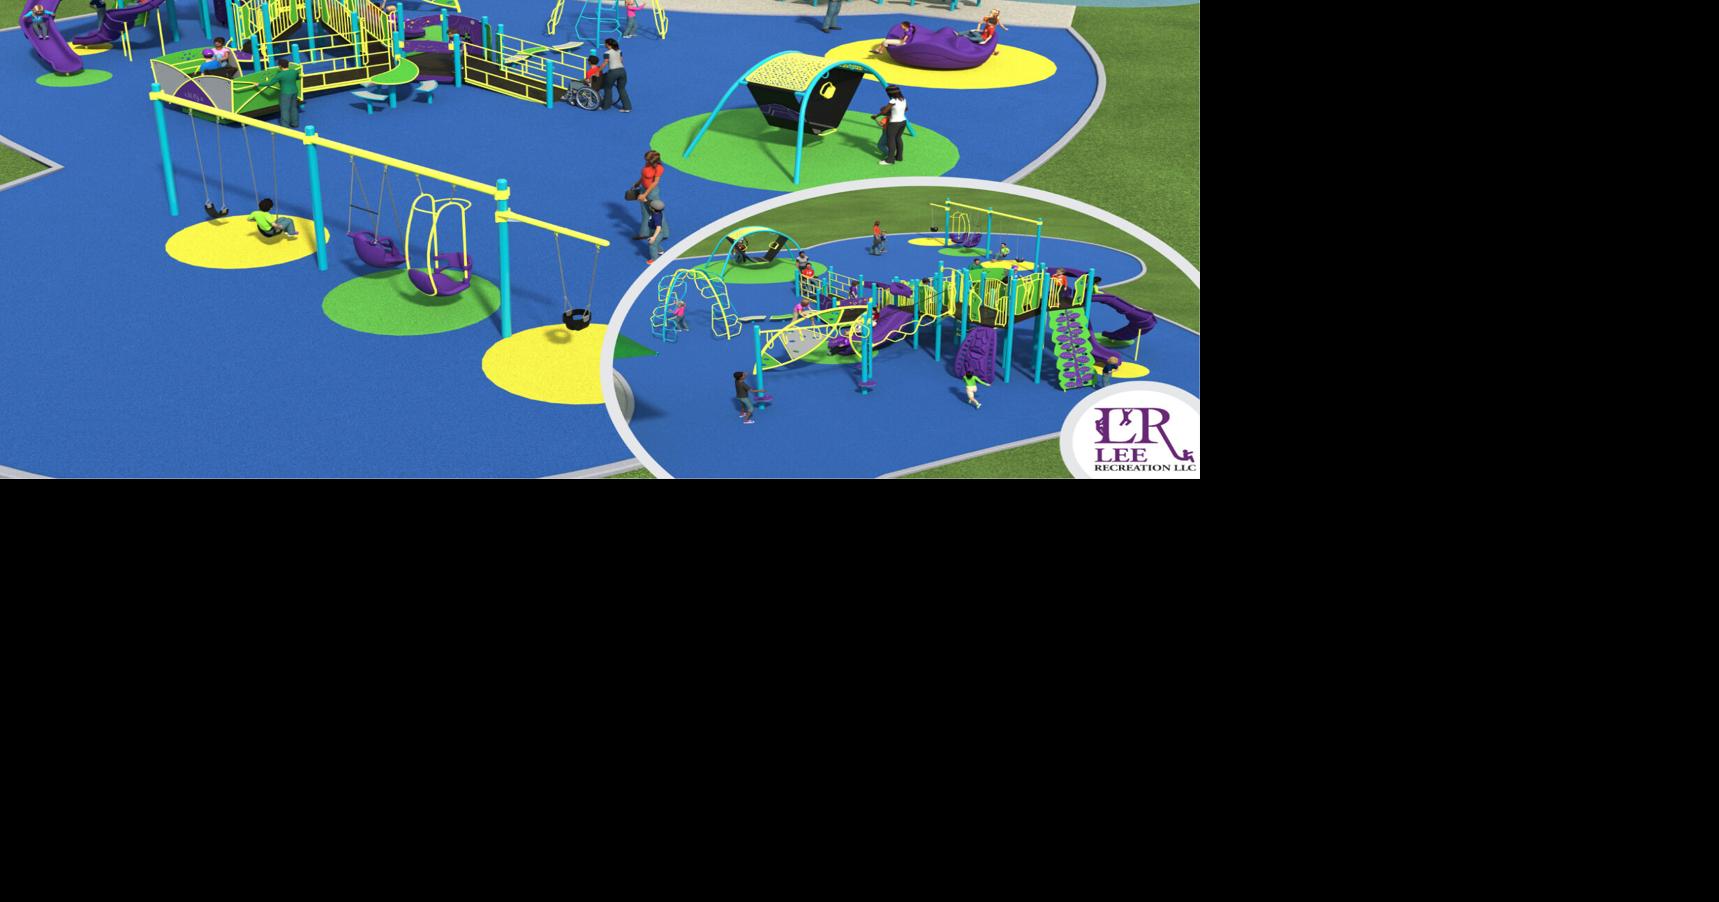 Kiwanis clubs seek help to finish fundraising for all-inclusive playground | News